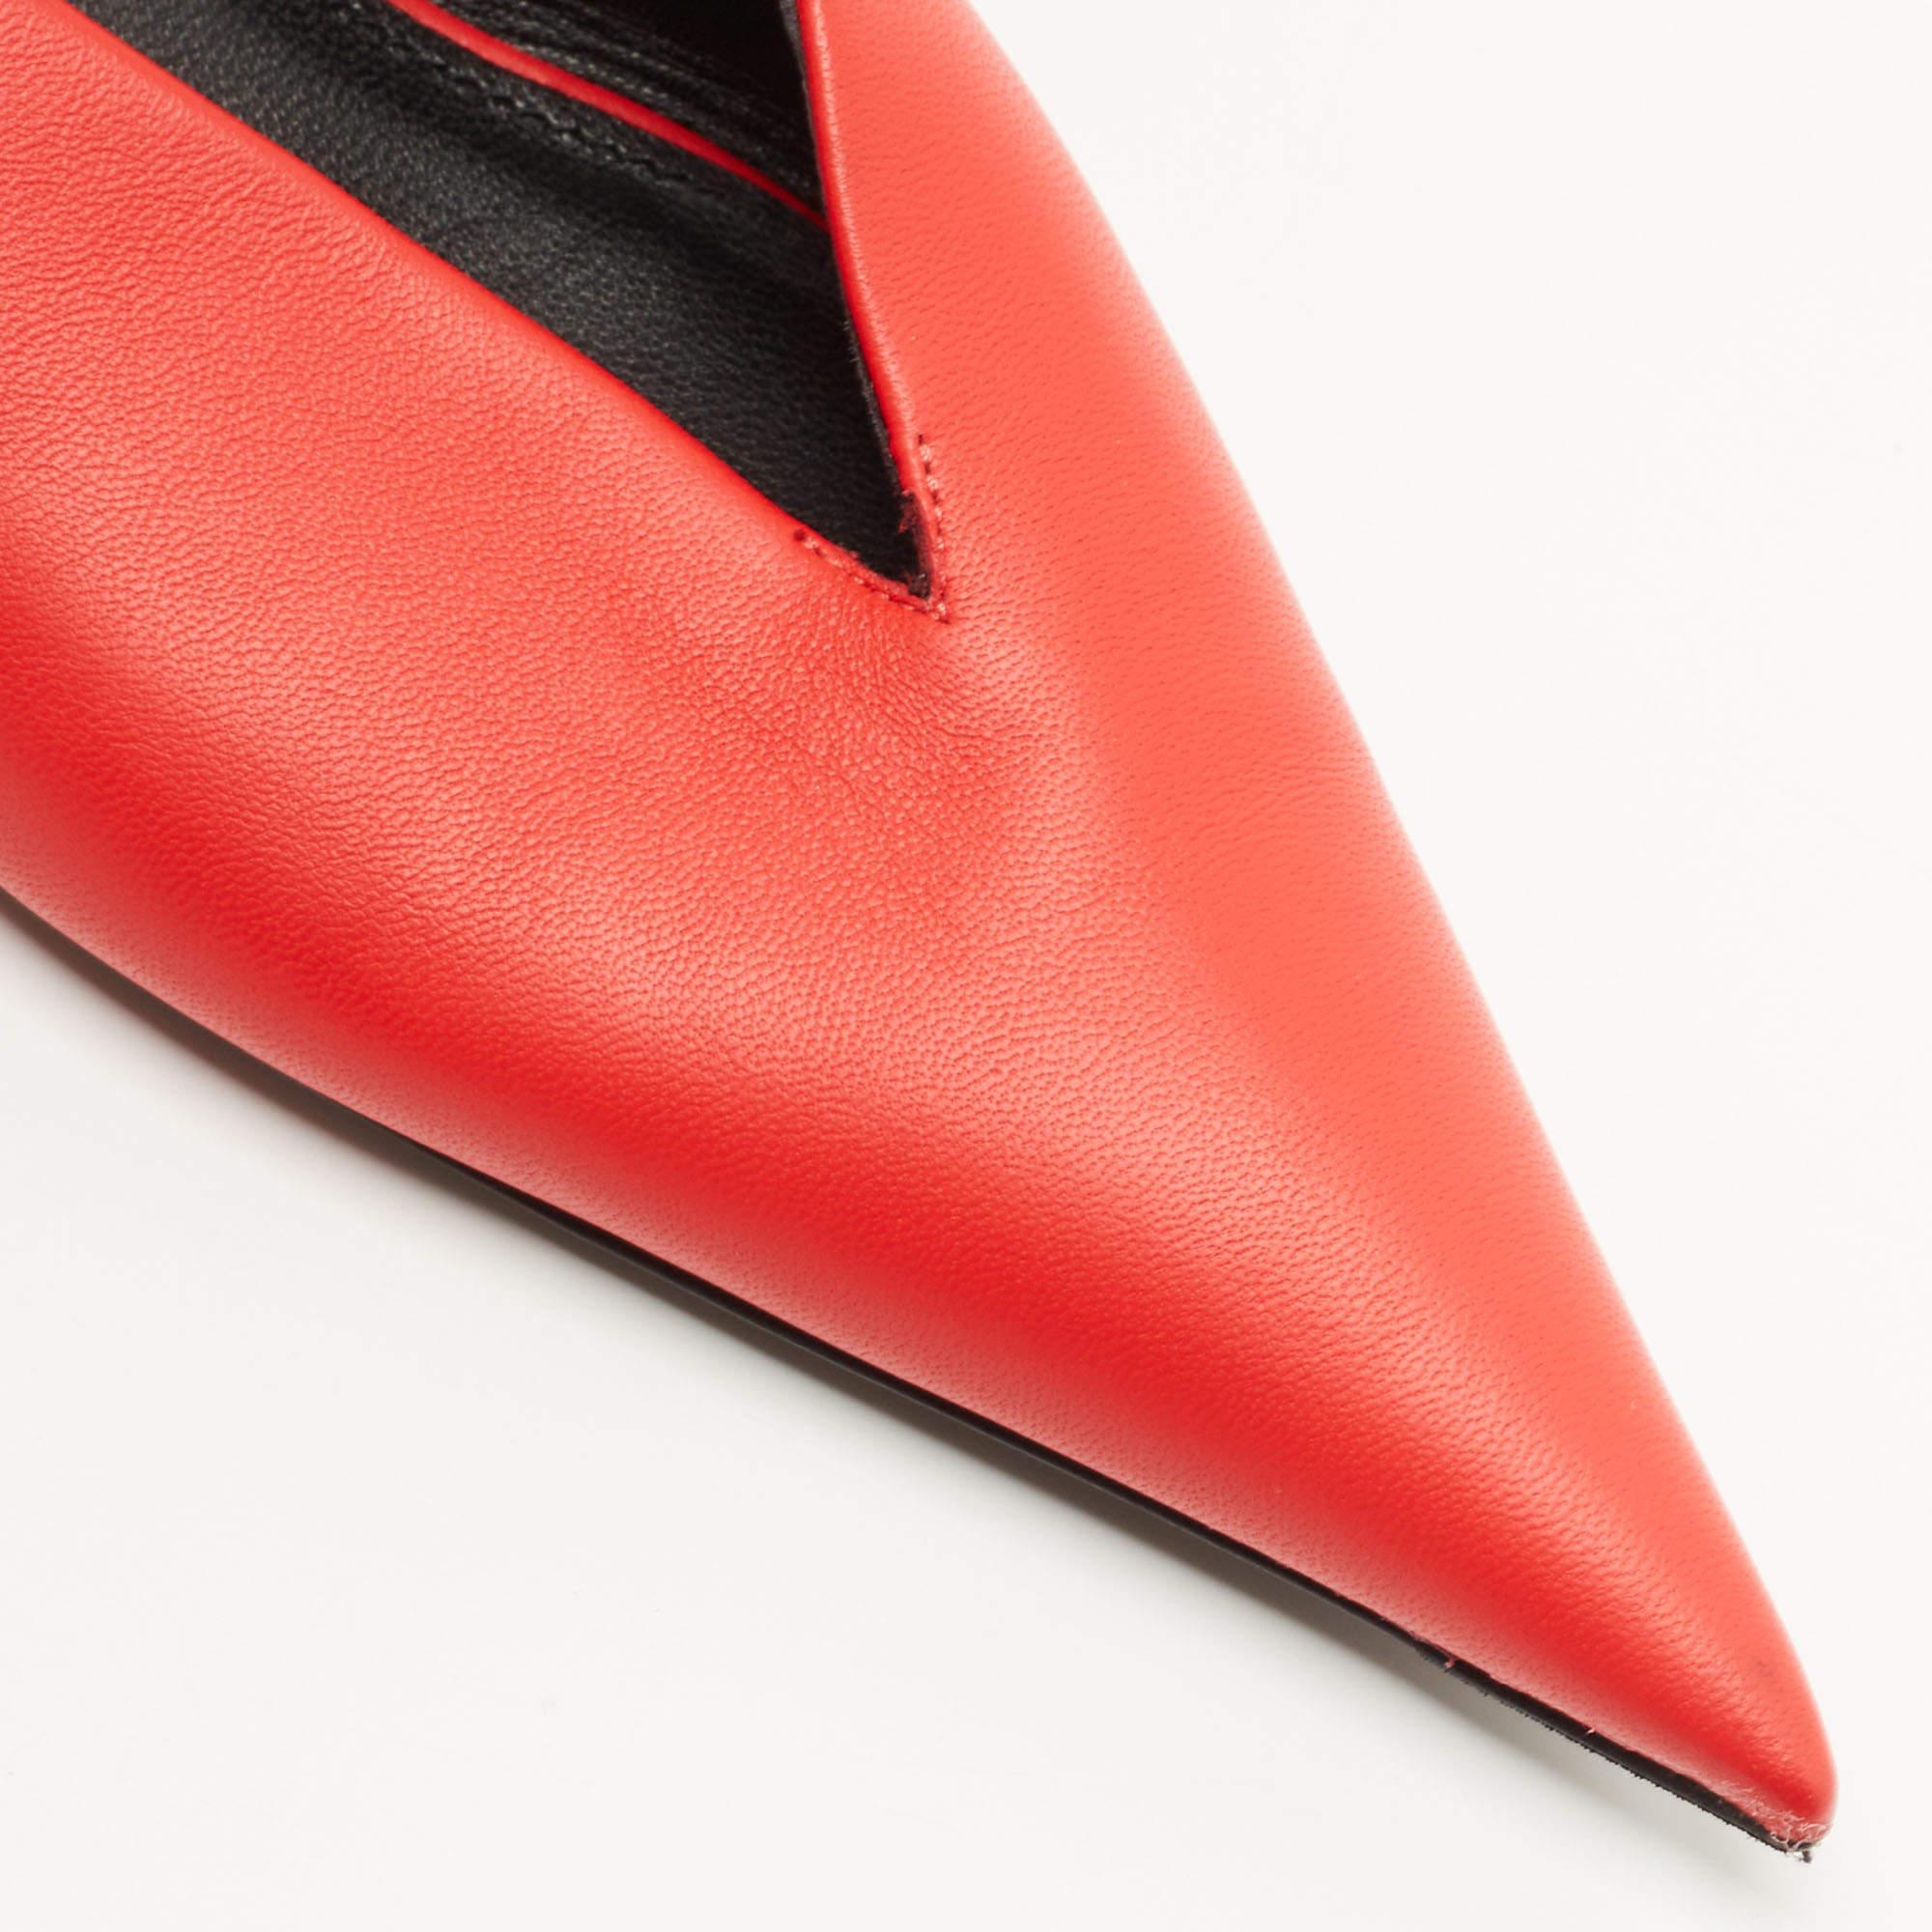 Balenciaga Red Leather Knife Pointed Toe Ankle Wrap Pumps Size 38 For Sale 4